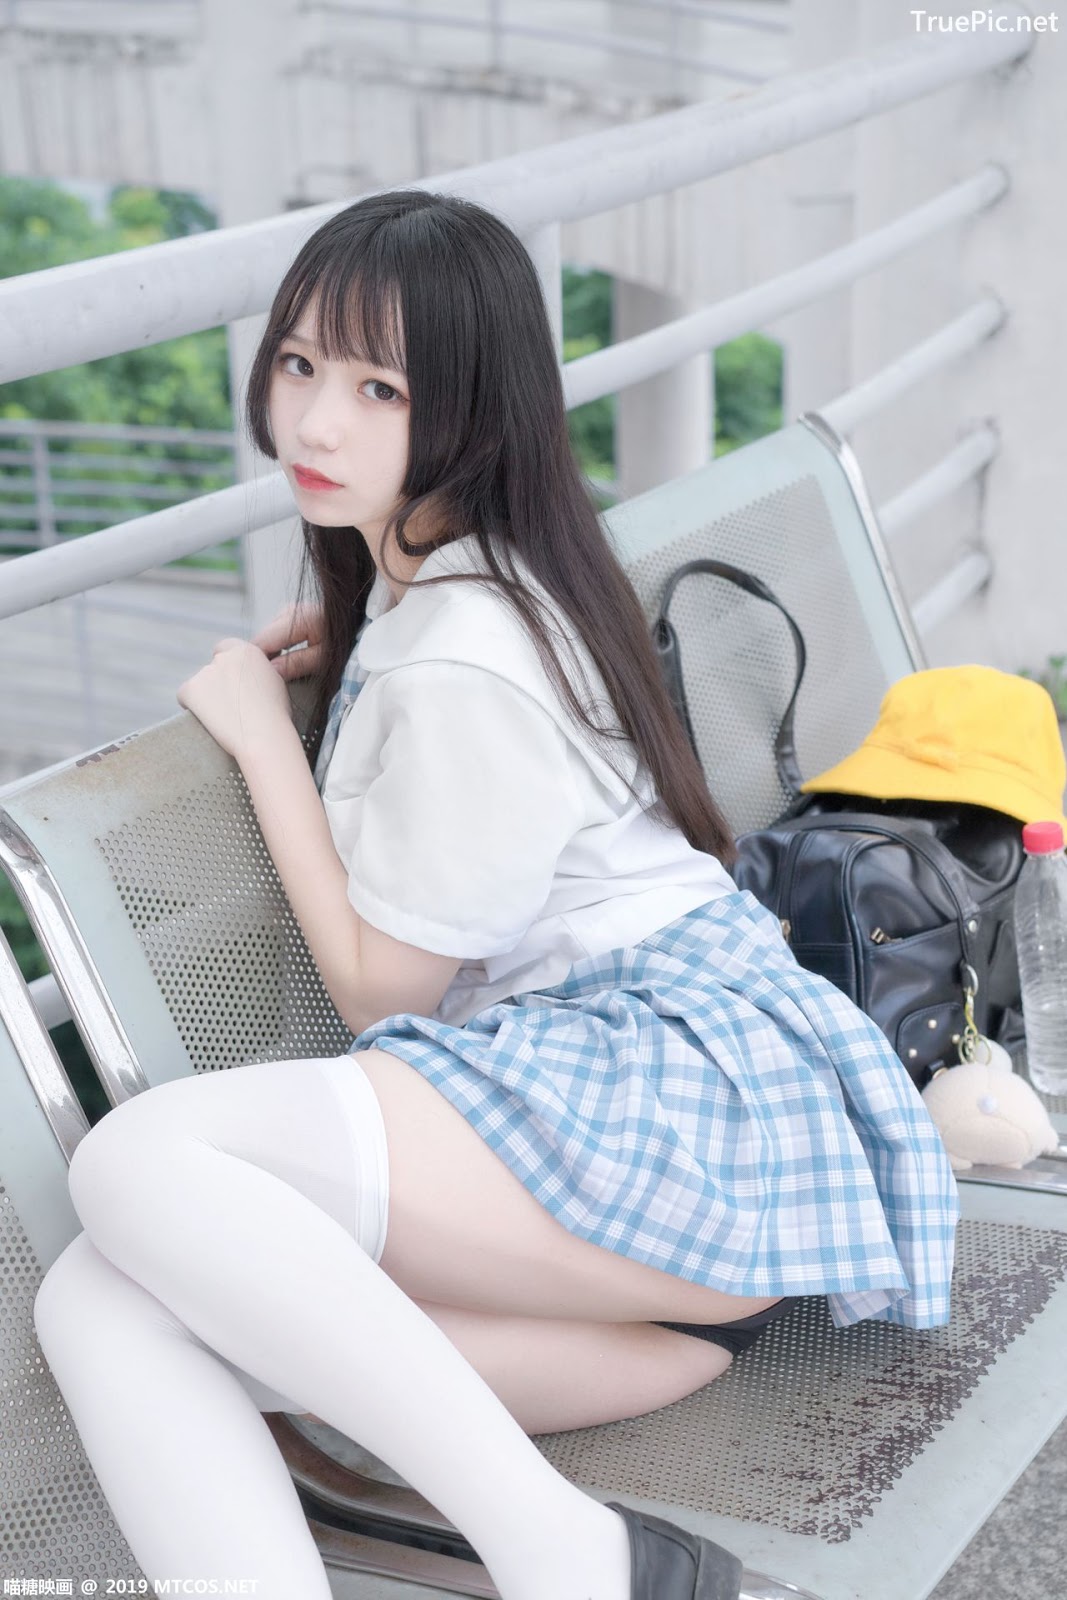 Image [MTCos] 喵糖映画 Vol.015 – Chinese Cute Model - White Shirt and Plaid Skirt - TruePic.net- Picture-29